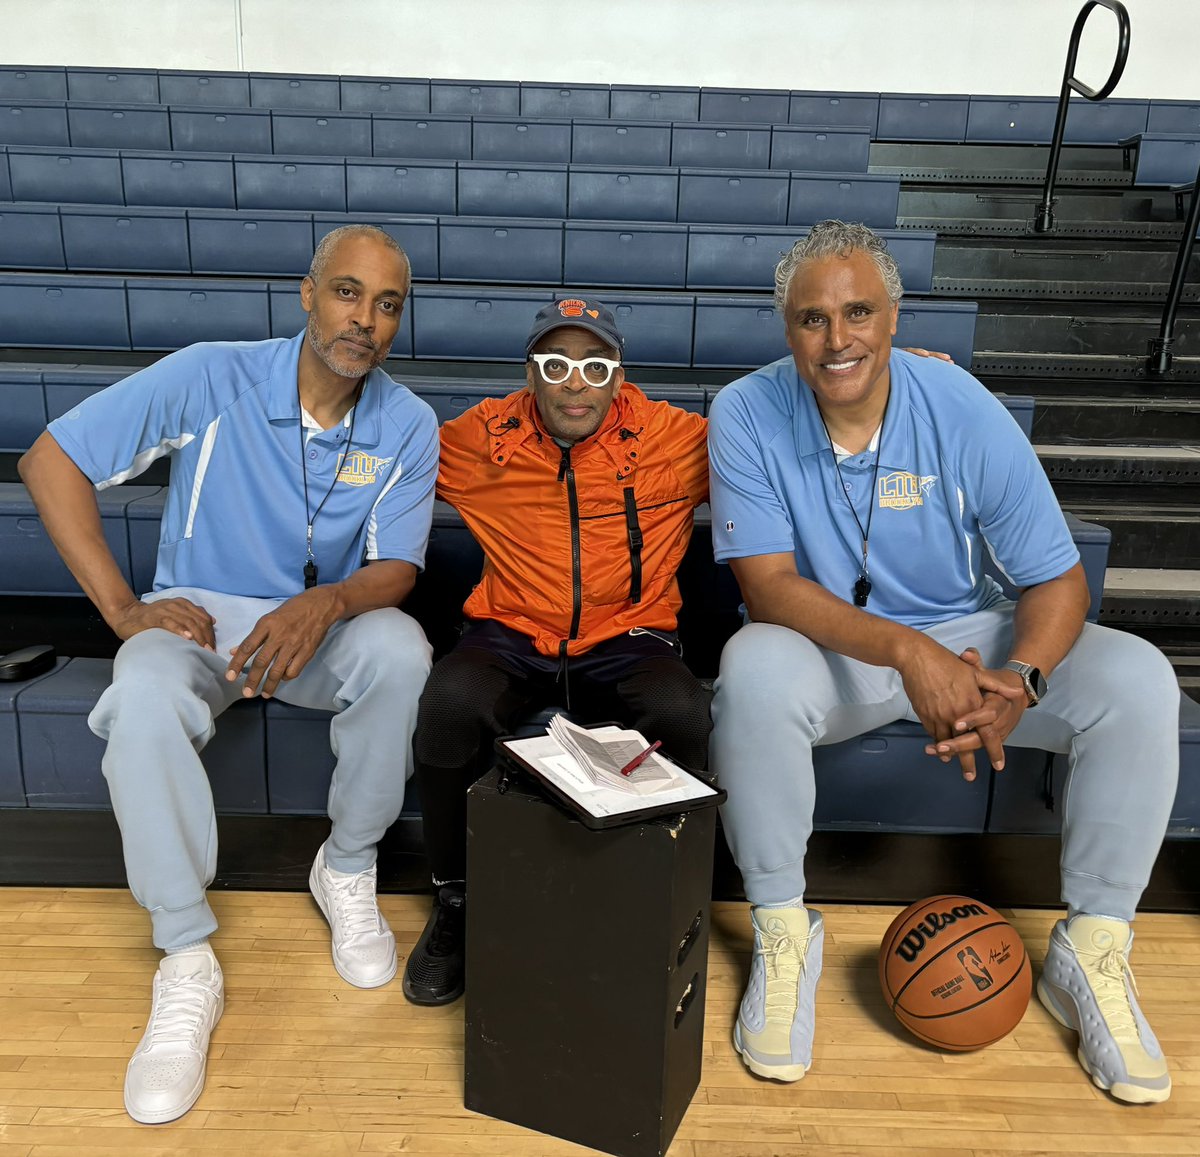 Spike Lee and Rick Fox in the building with Coach Strickland 🦈🏀👀